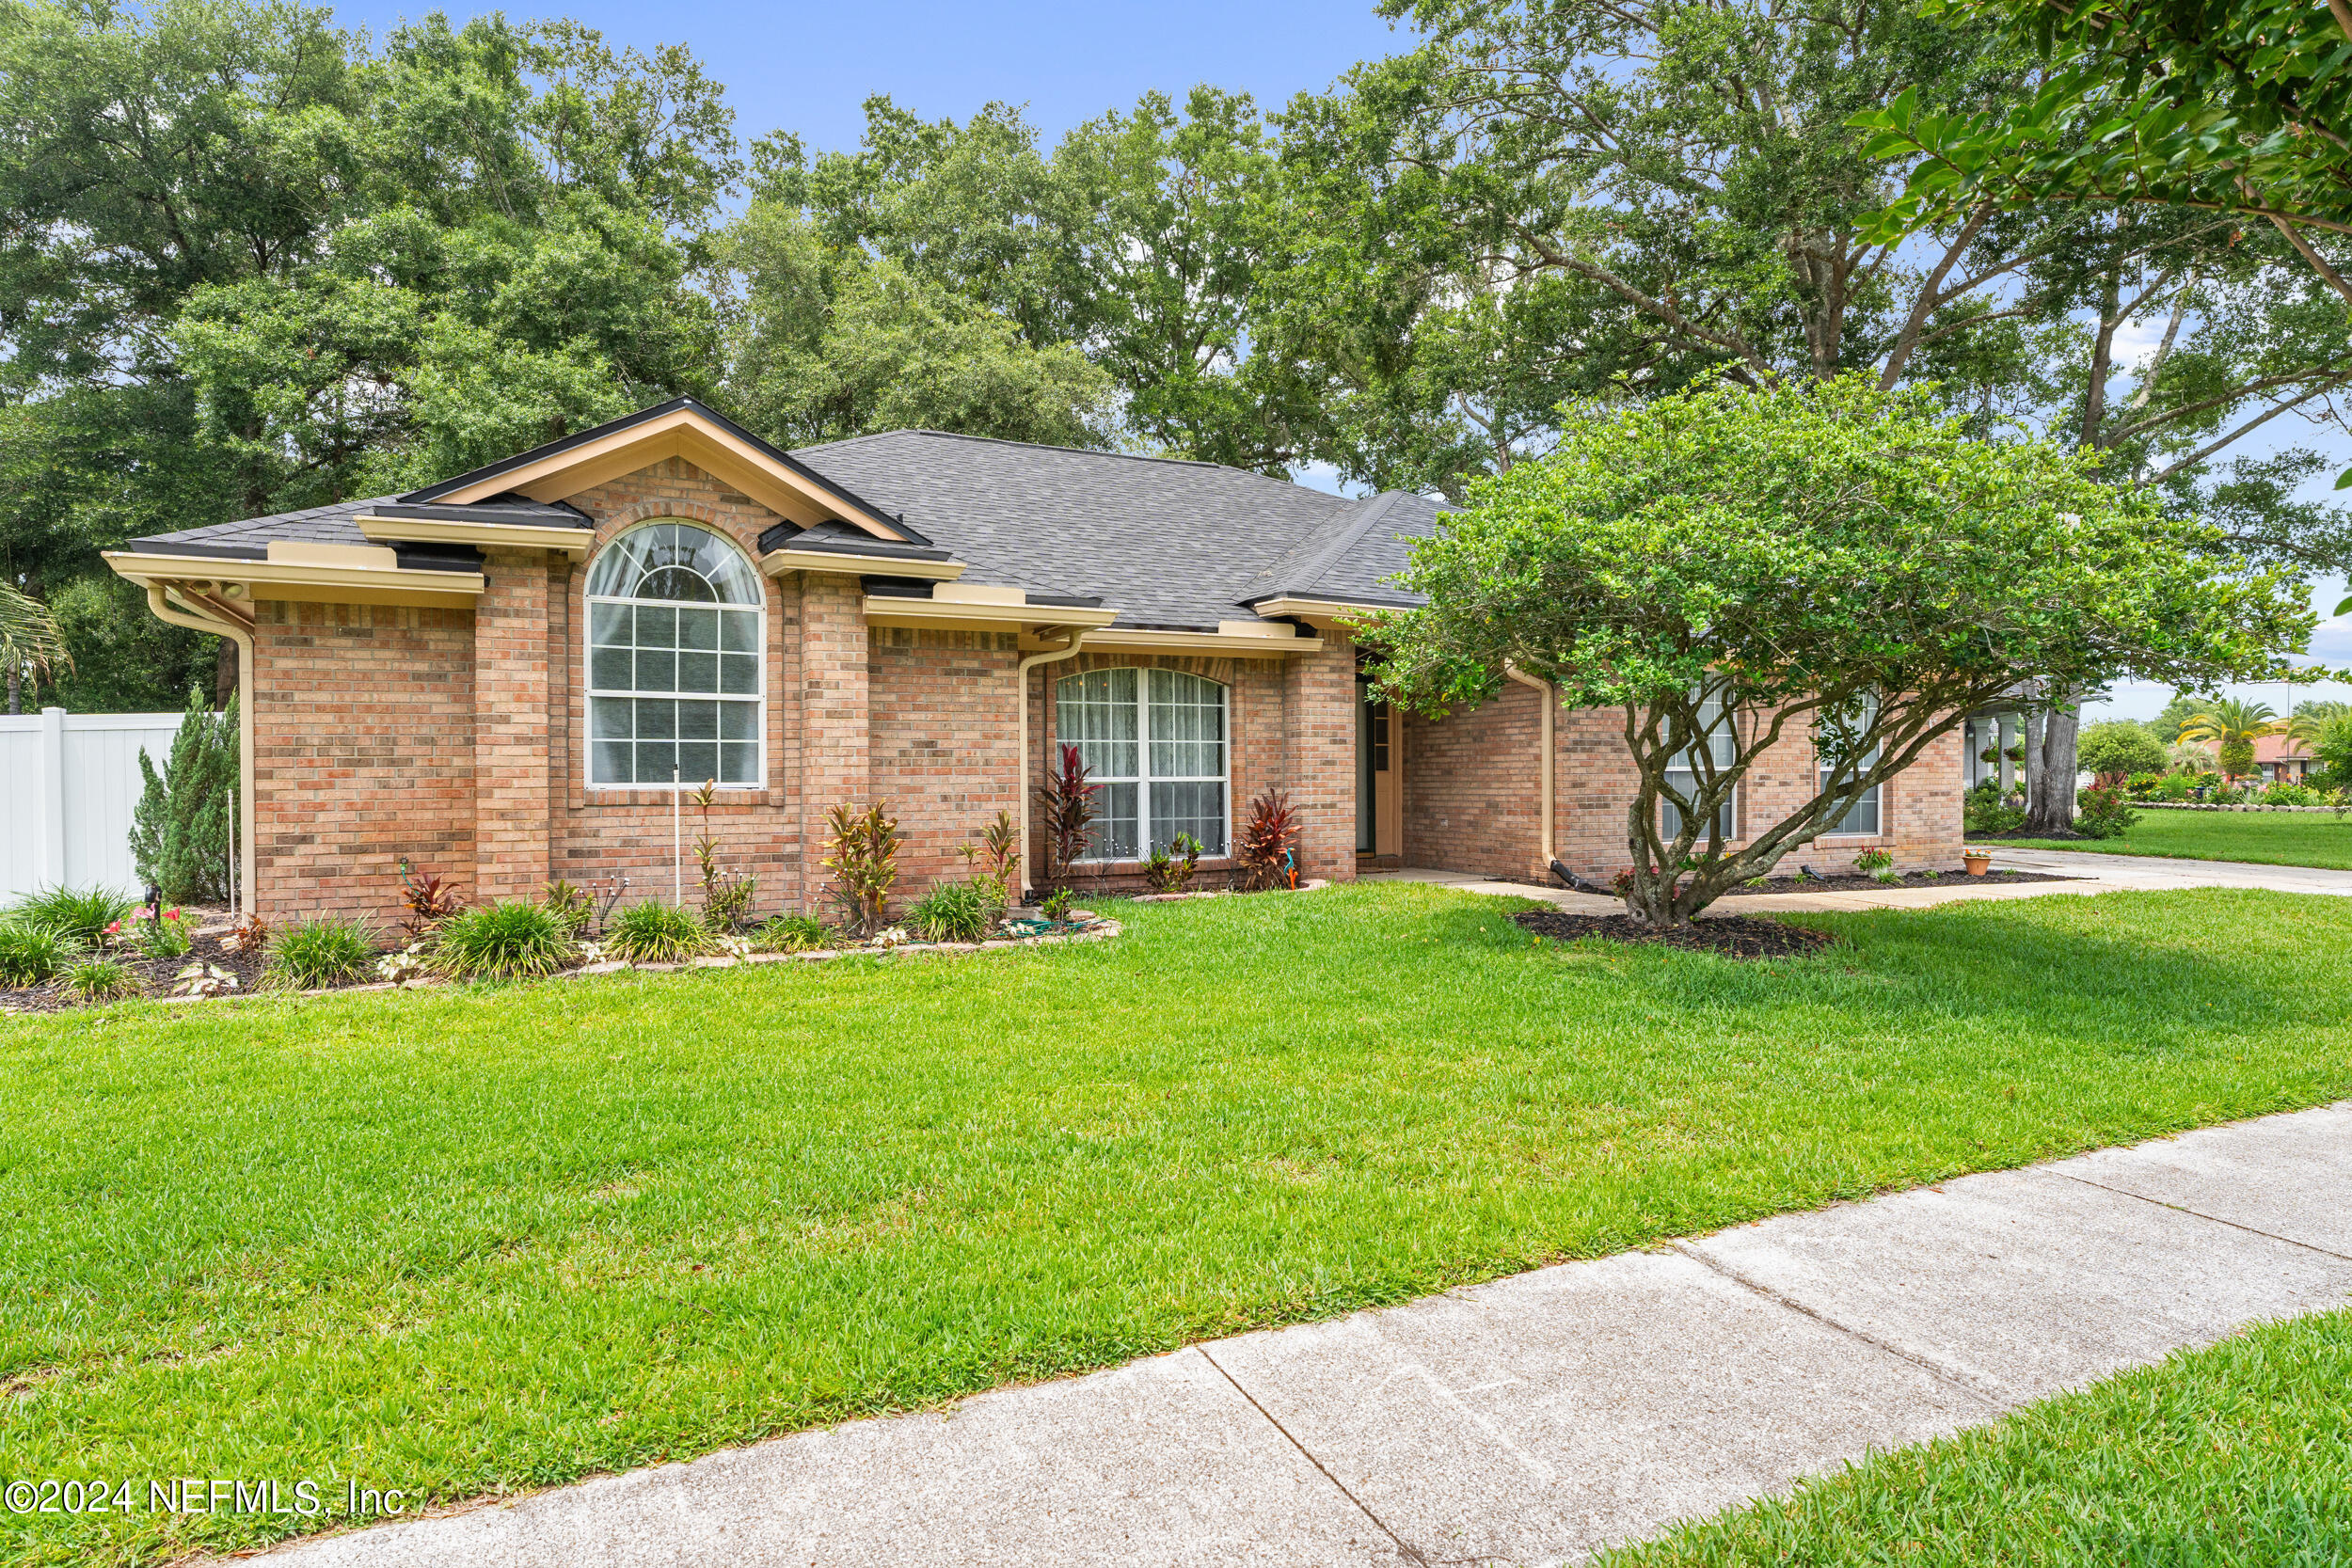 Middleburg, FL home for sale located at 3150 Twilight Court, Middleburg, FL 32068